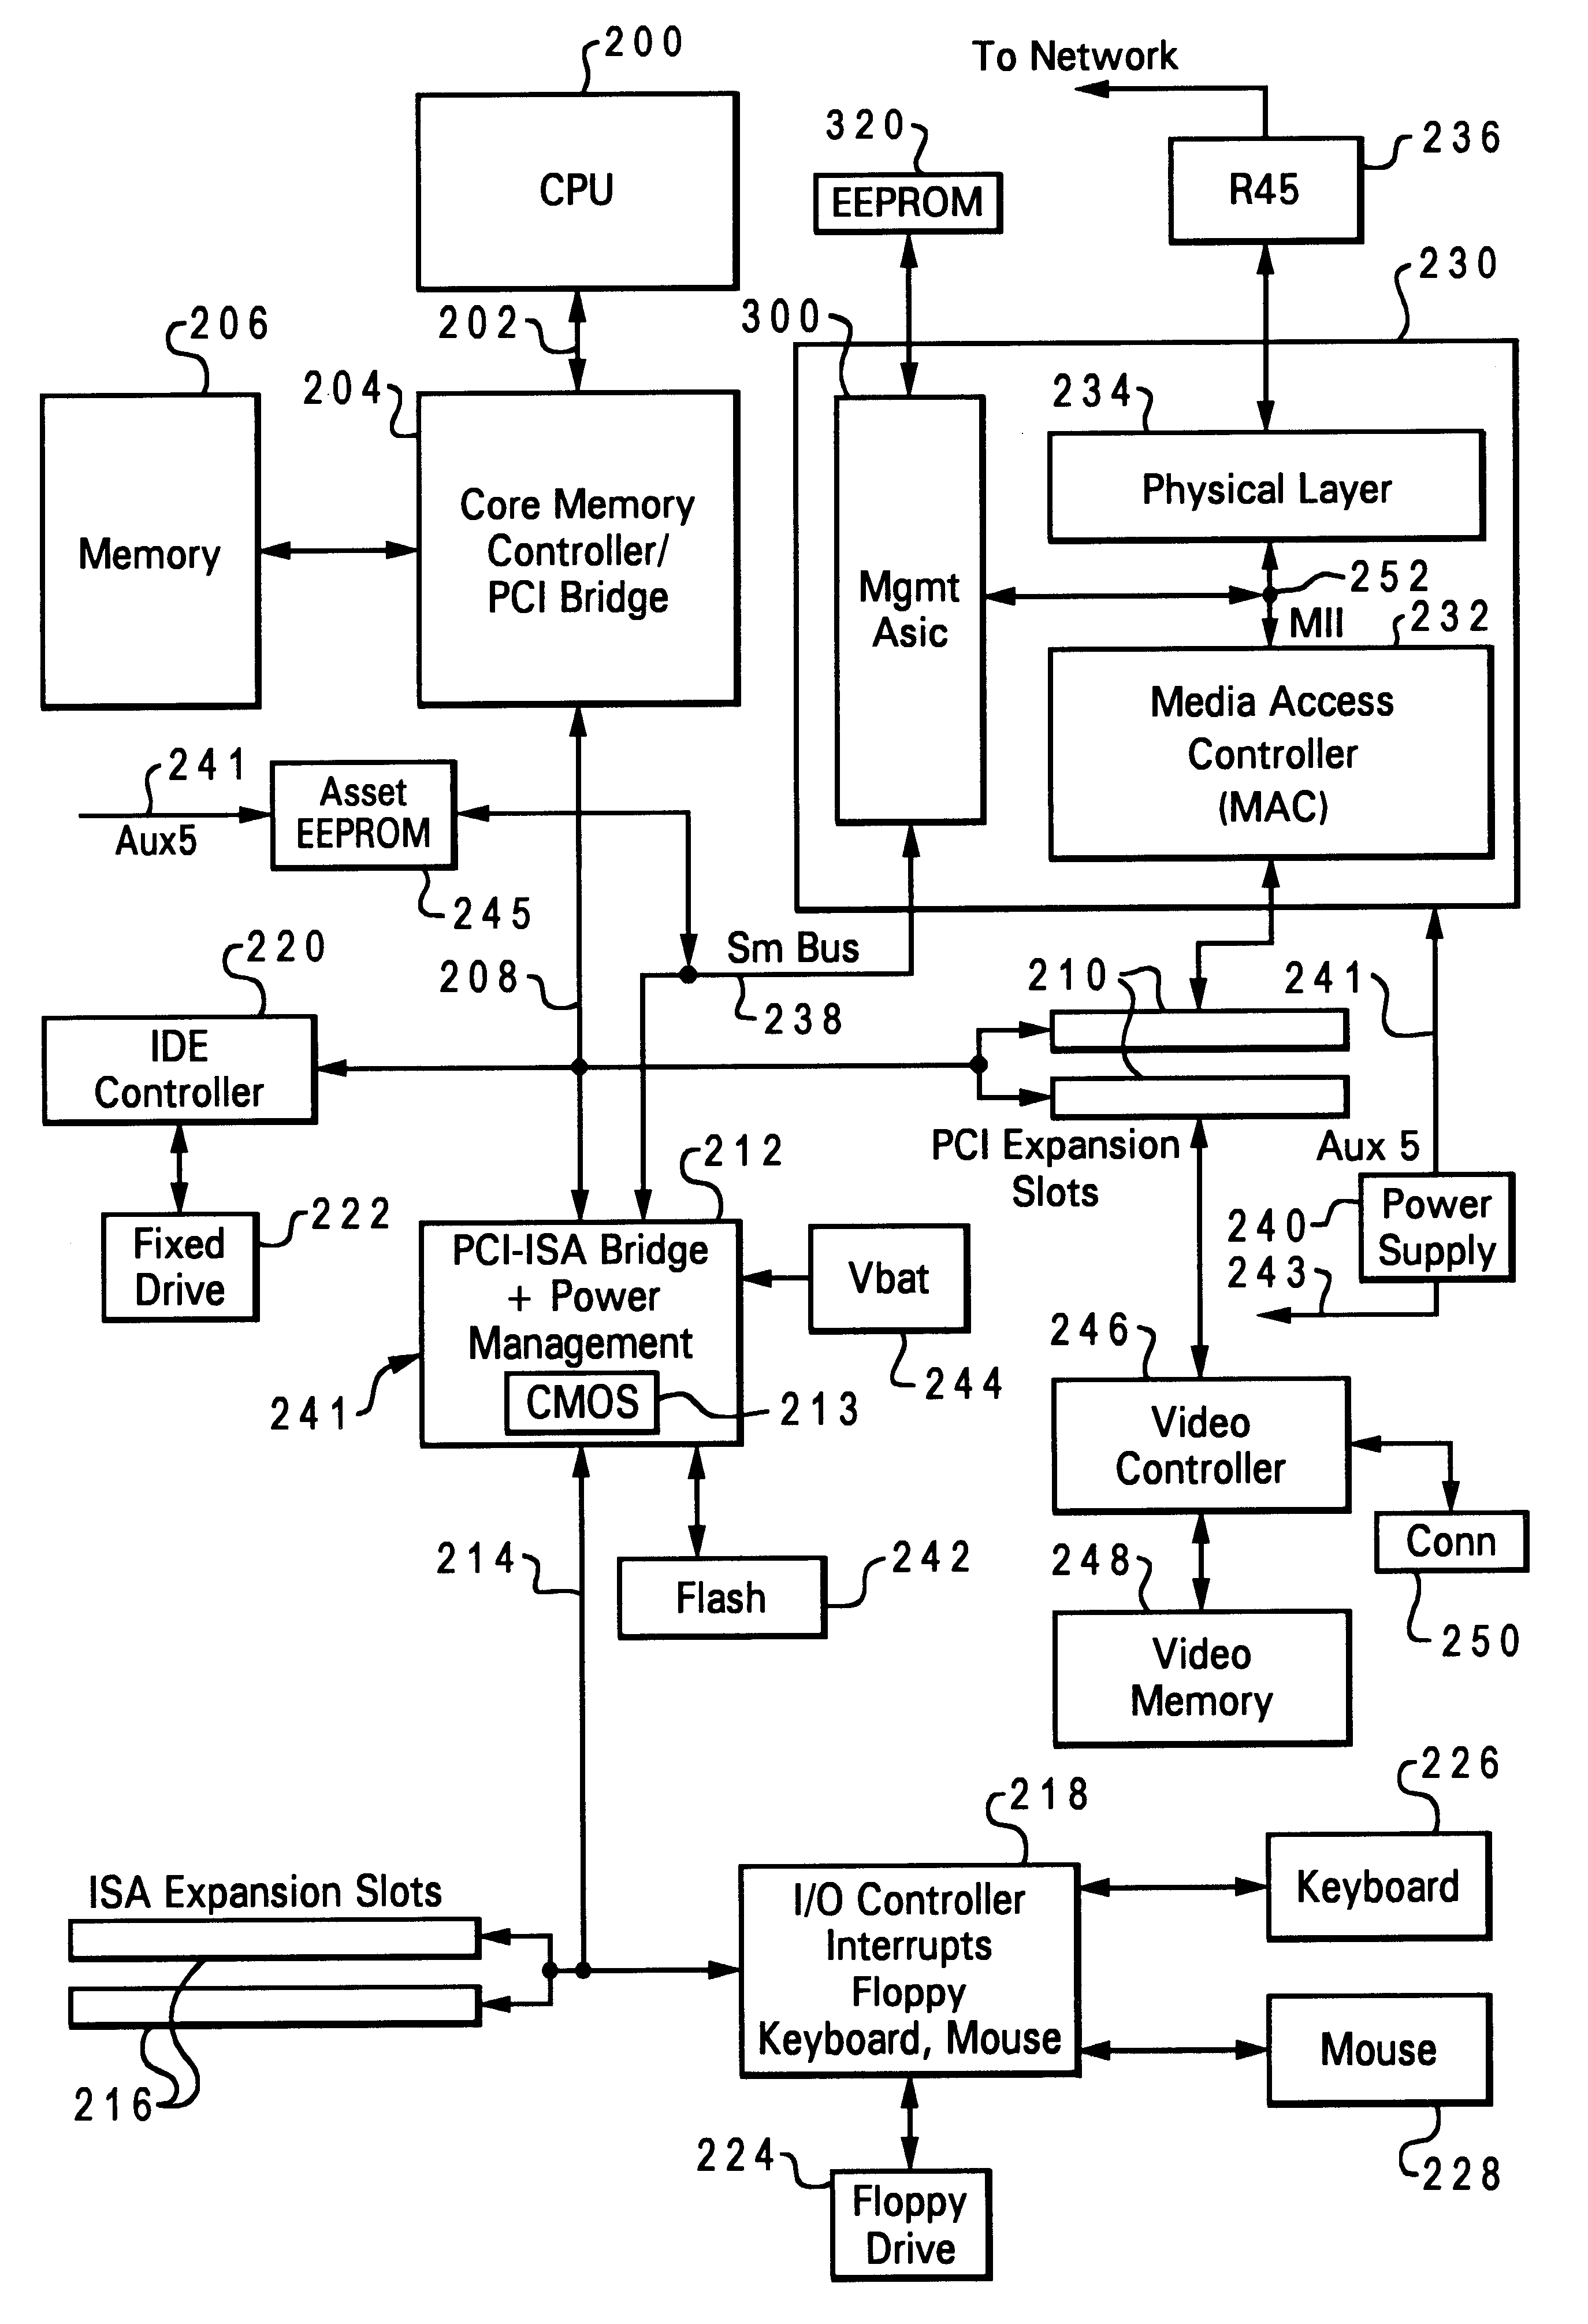 Data processing system and method for permitting a server to remotely access a powered-off client computer system's asset information